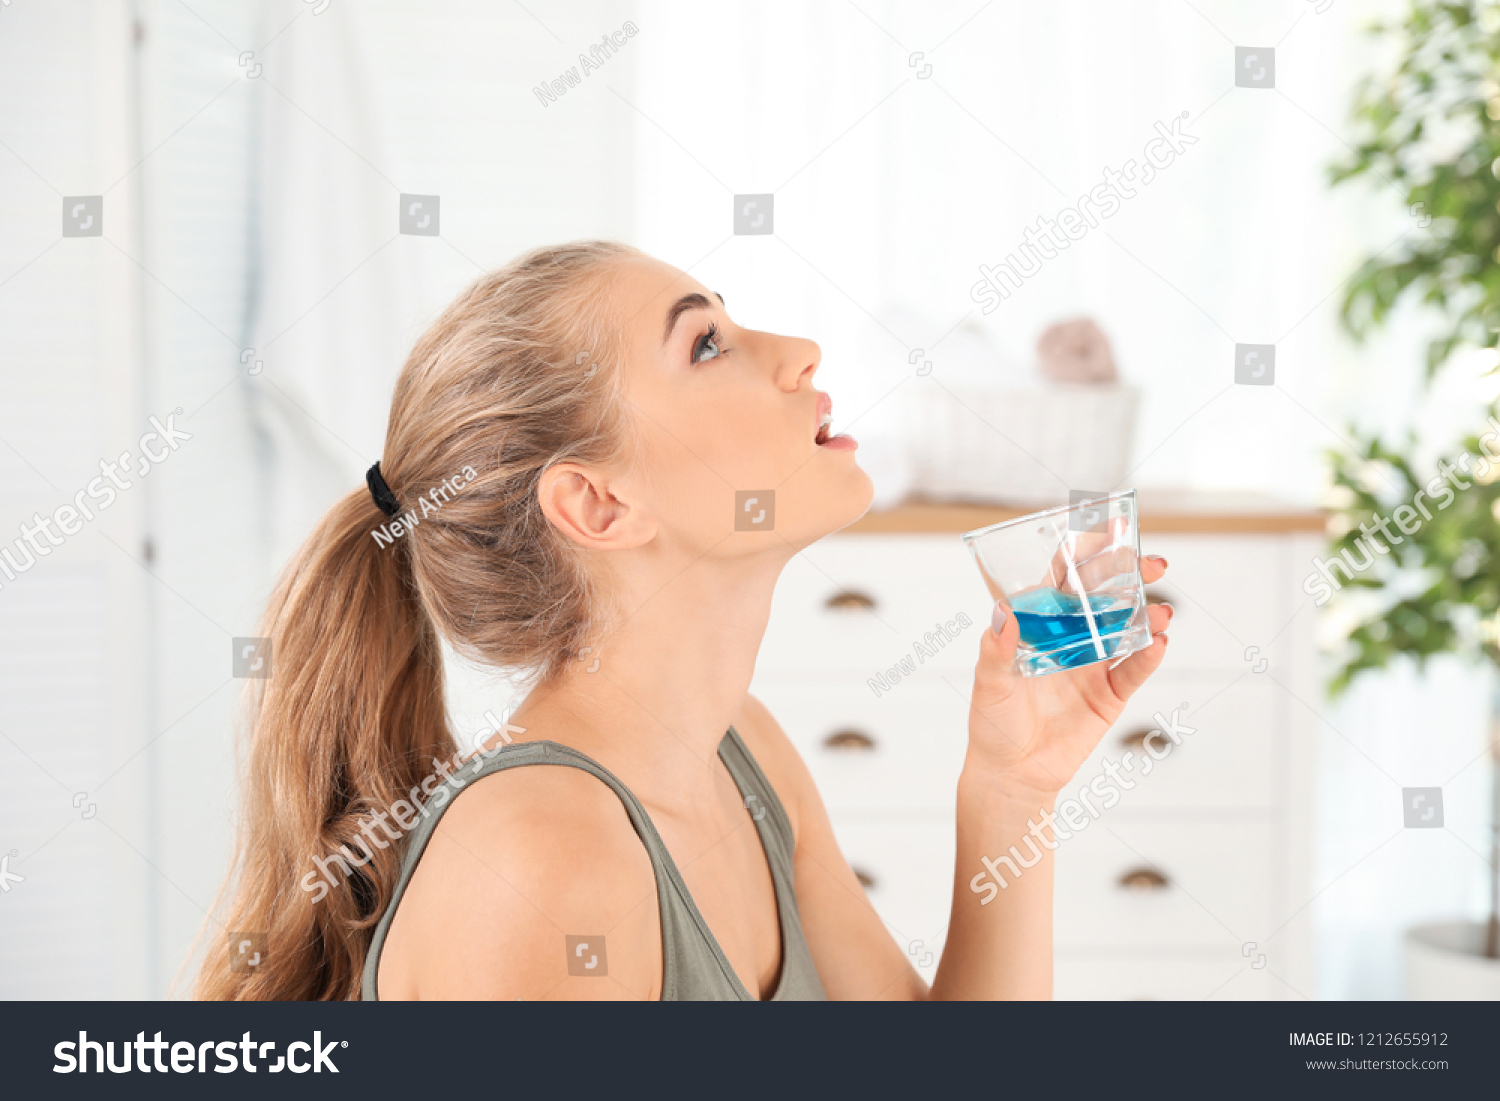 Woman rinsing mouth with mouthwash in bathroom. Teeth care #1212655912